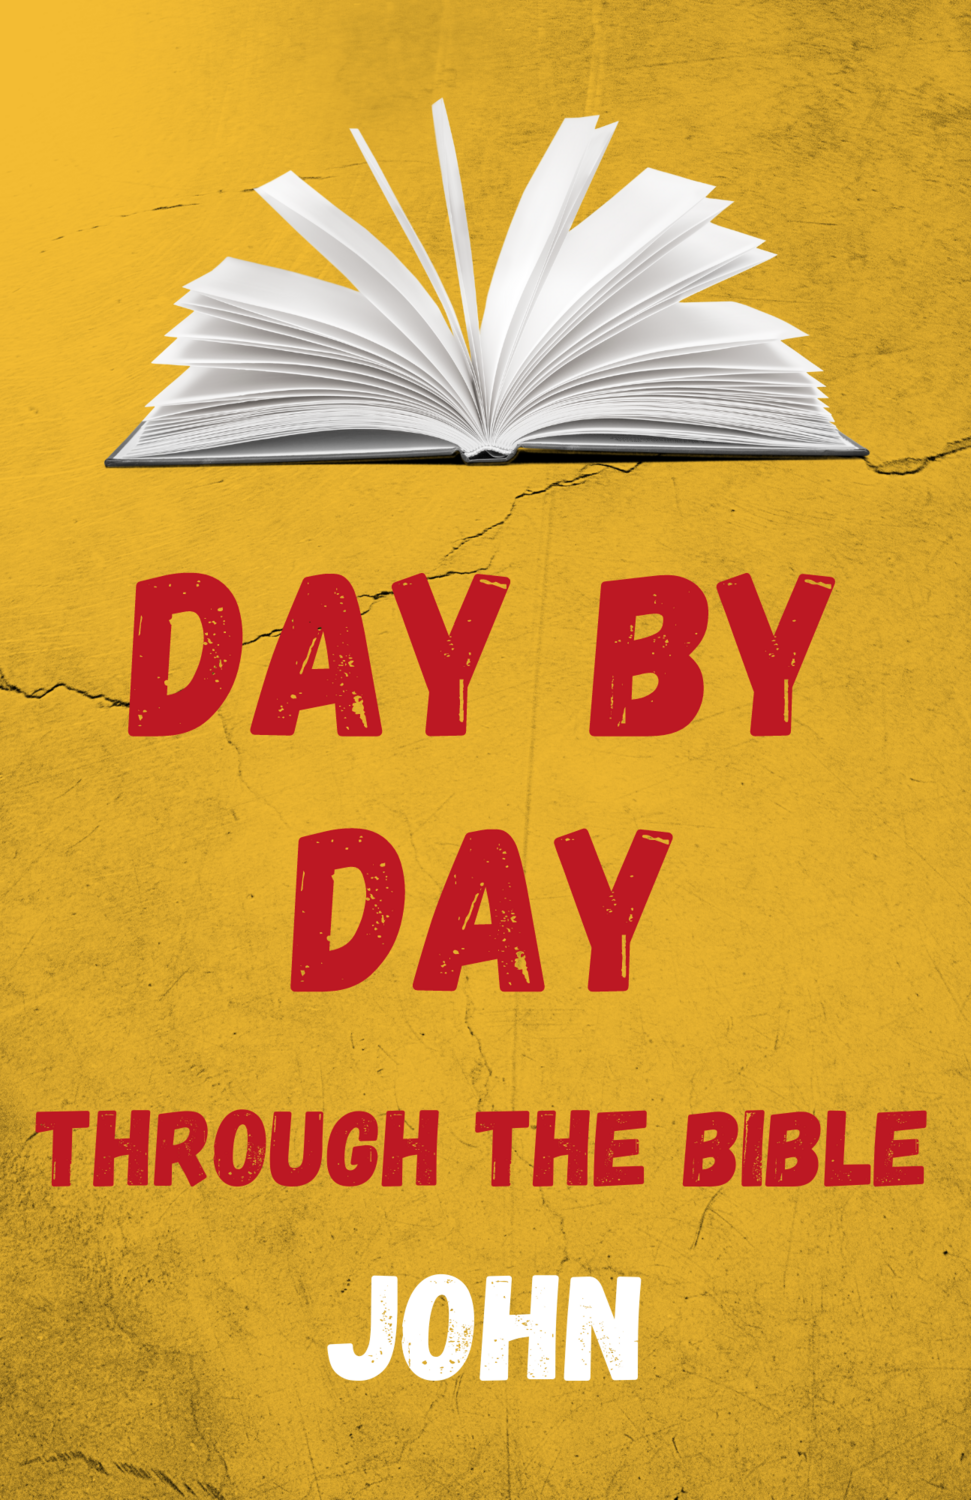 Day by Day Through the Bible: Twenty-One Days in John - Digital Download